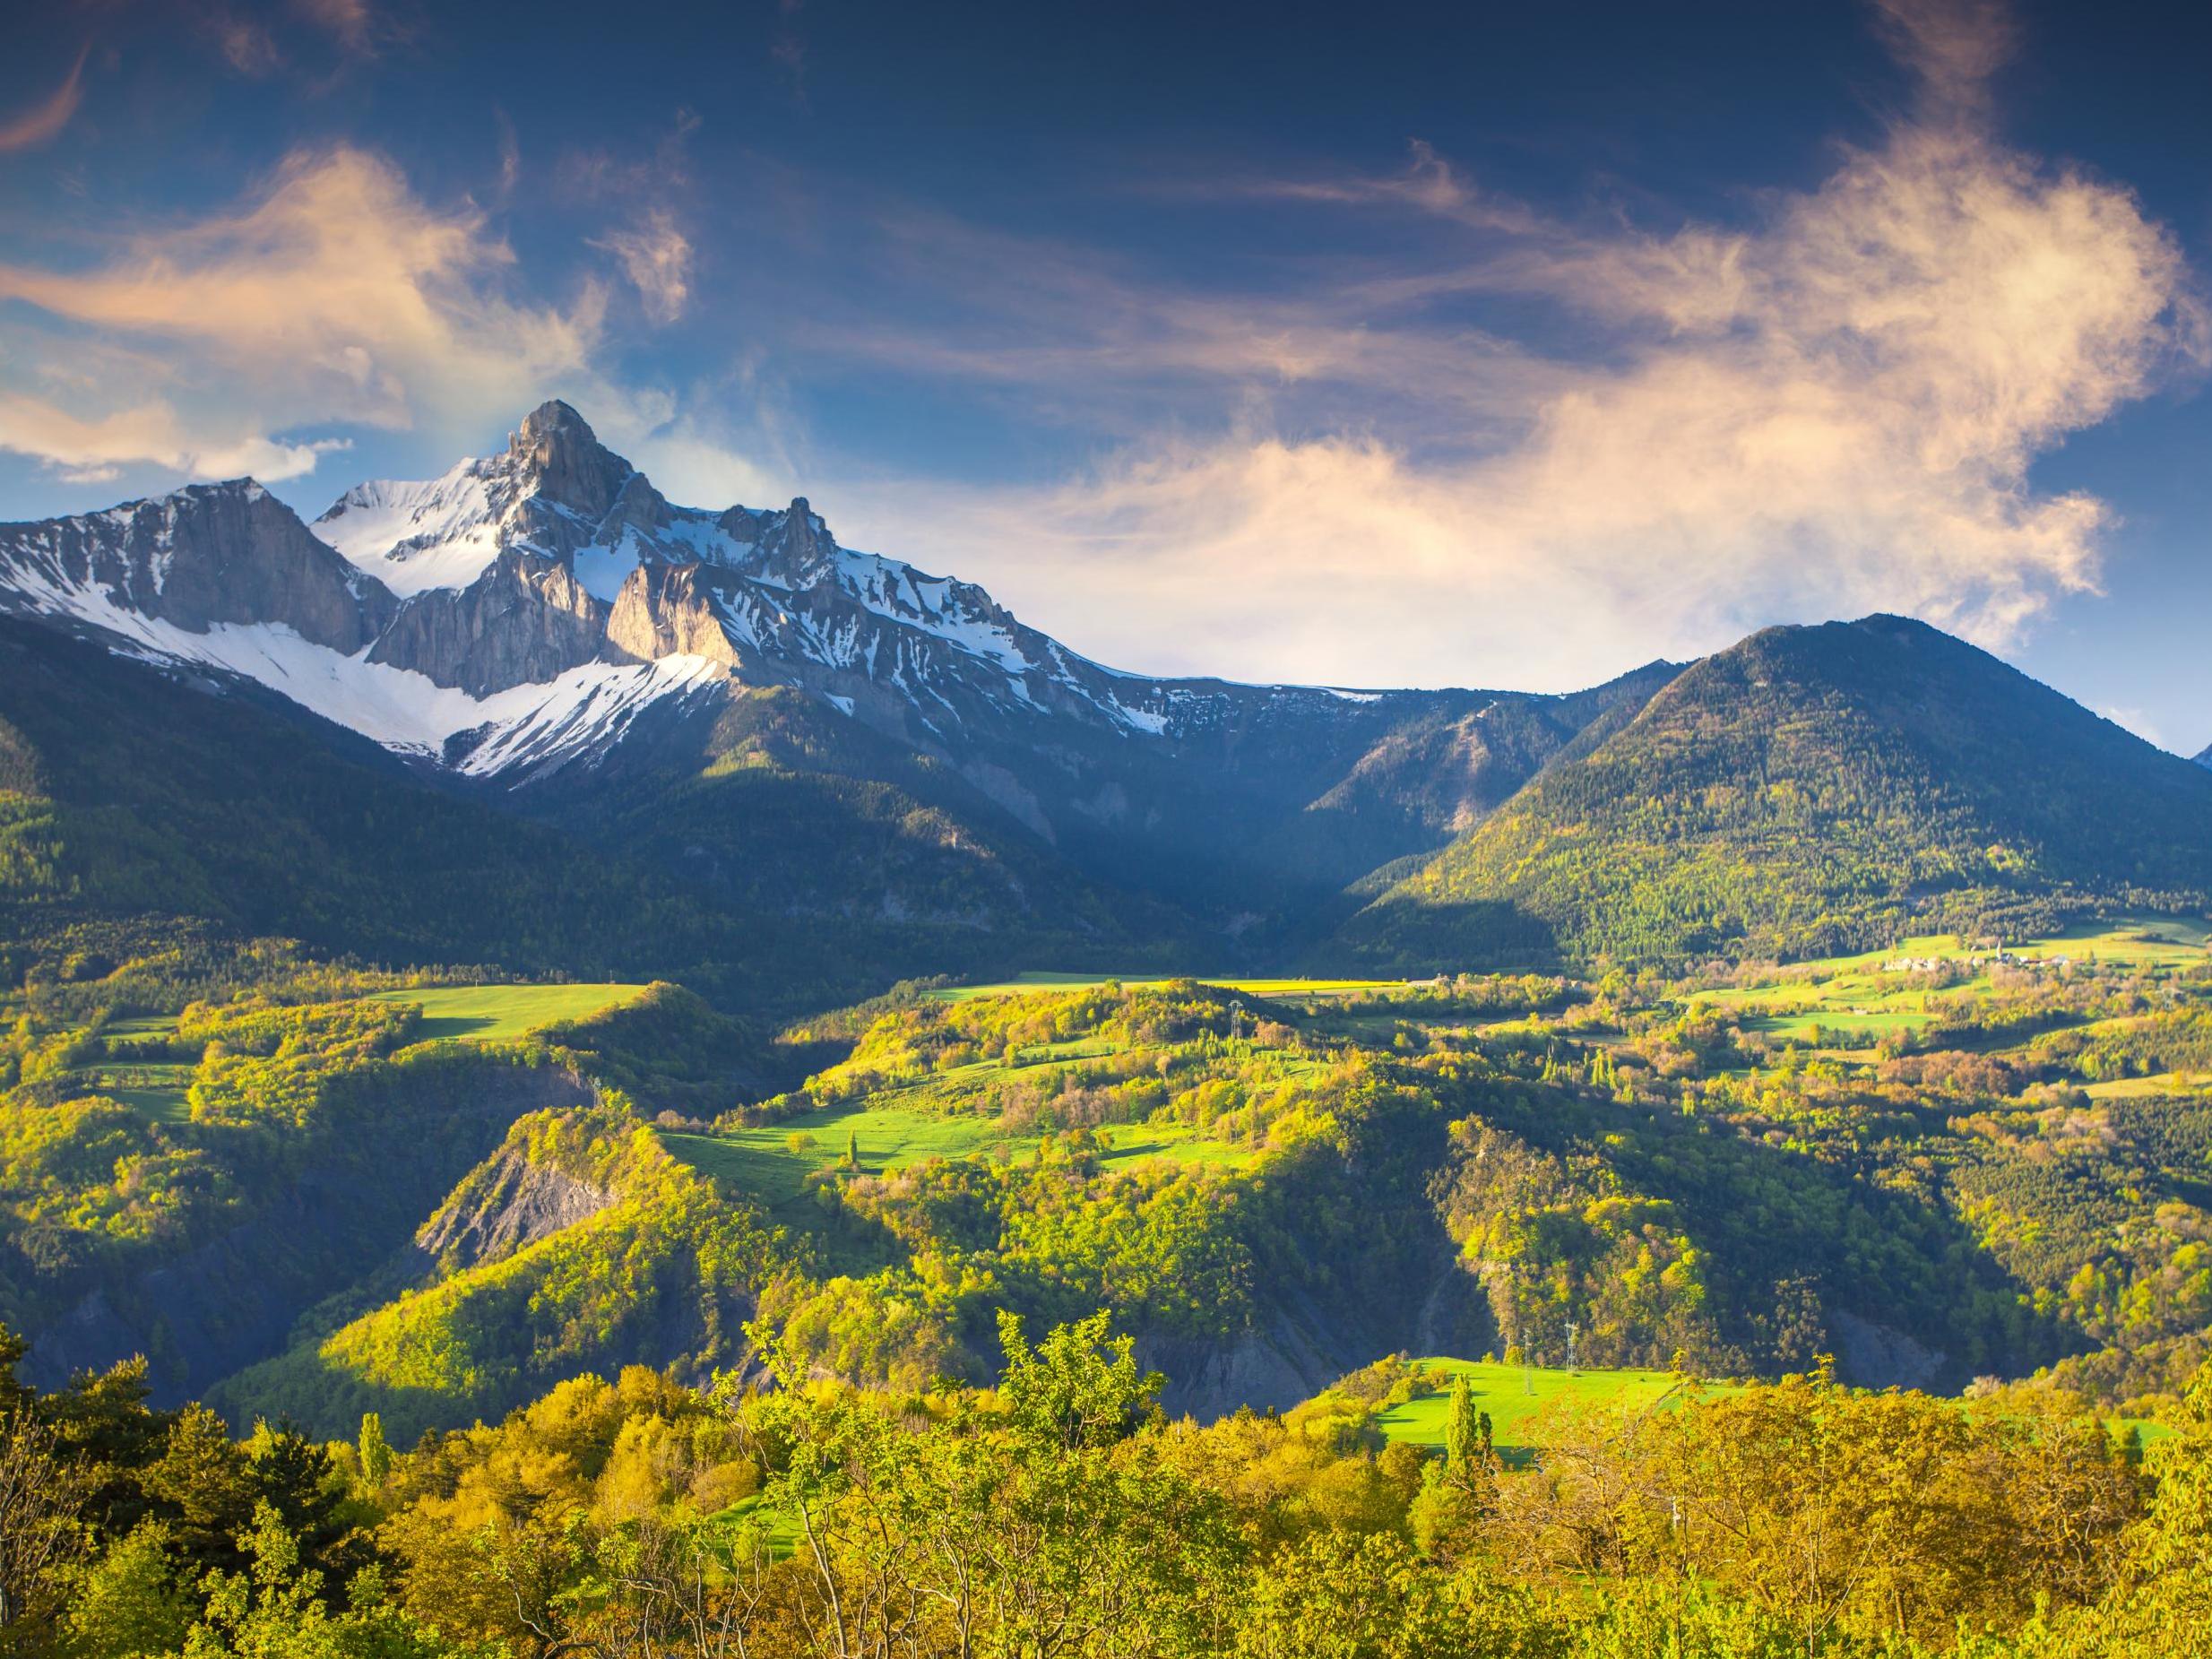 Get back to nature in the French Alps